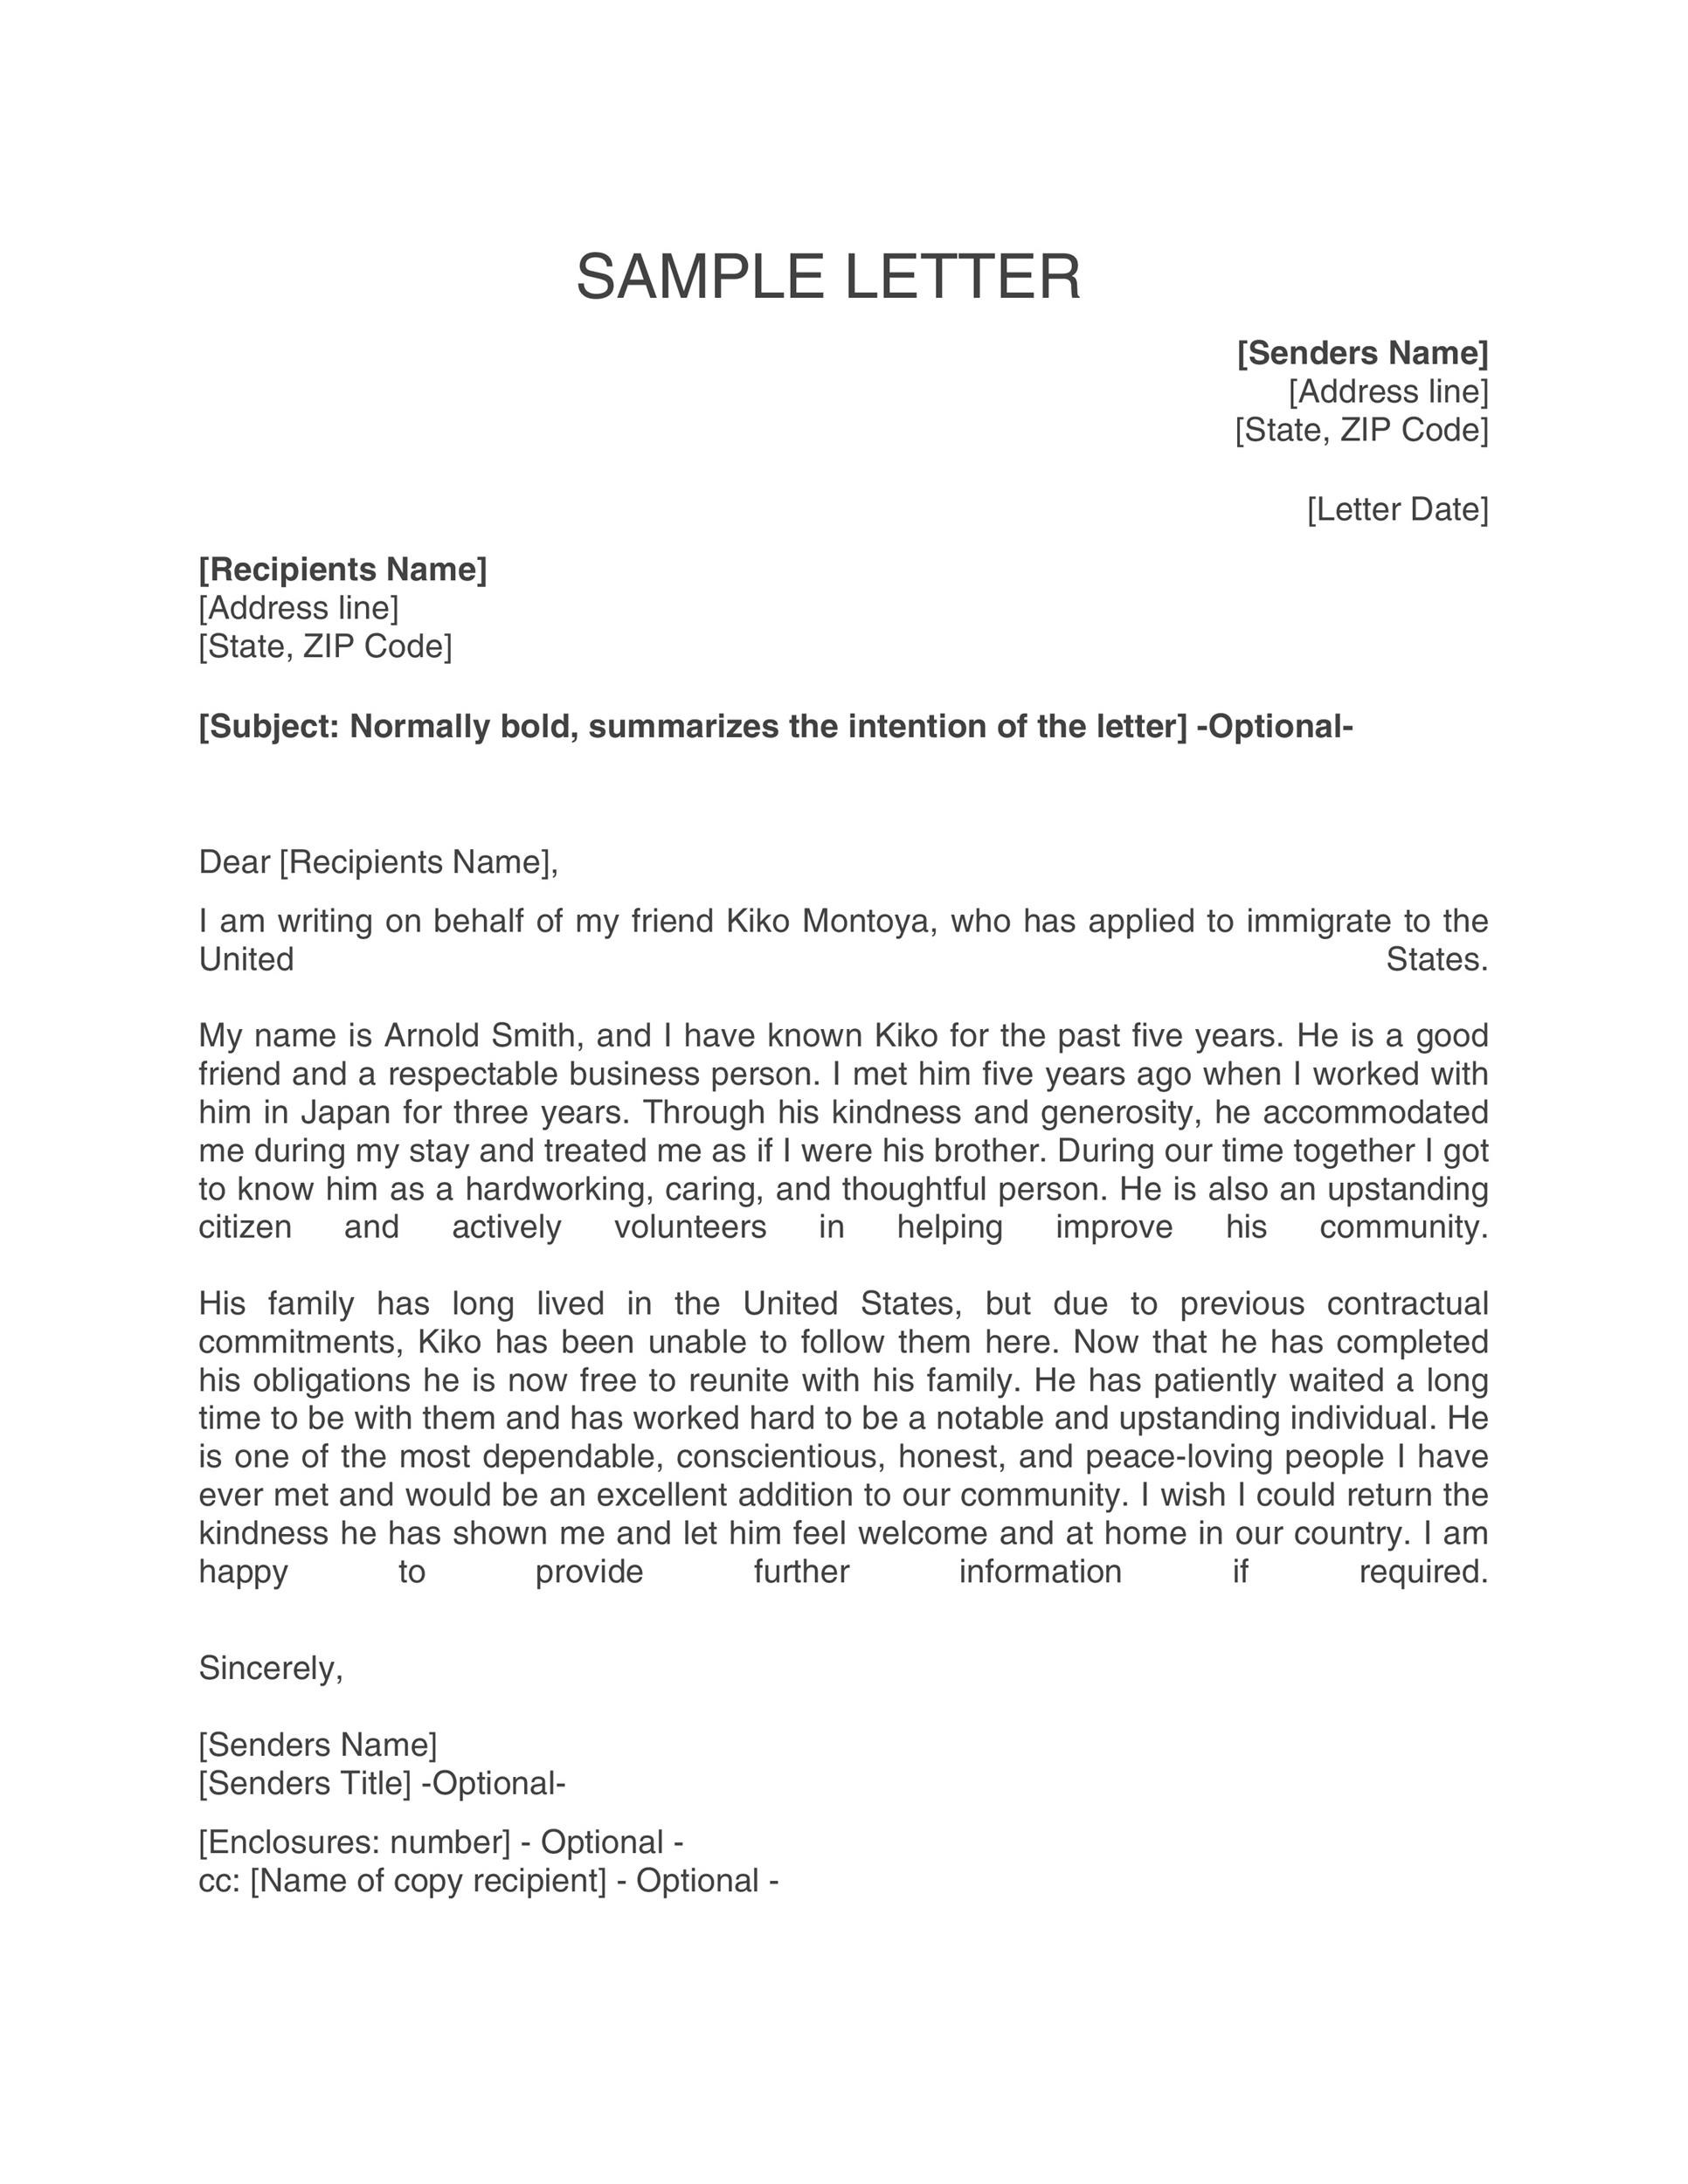 Sample Of Pardon Letter To Immigration Judge from templatelab.com